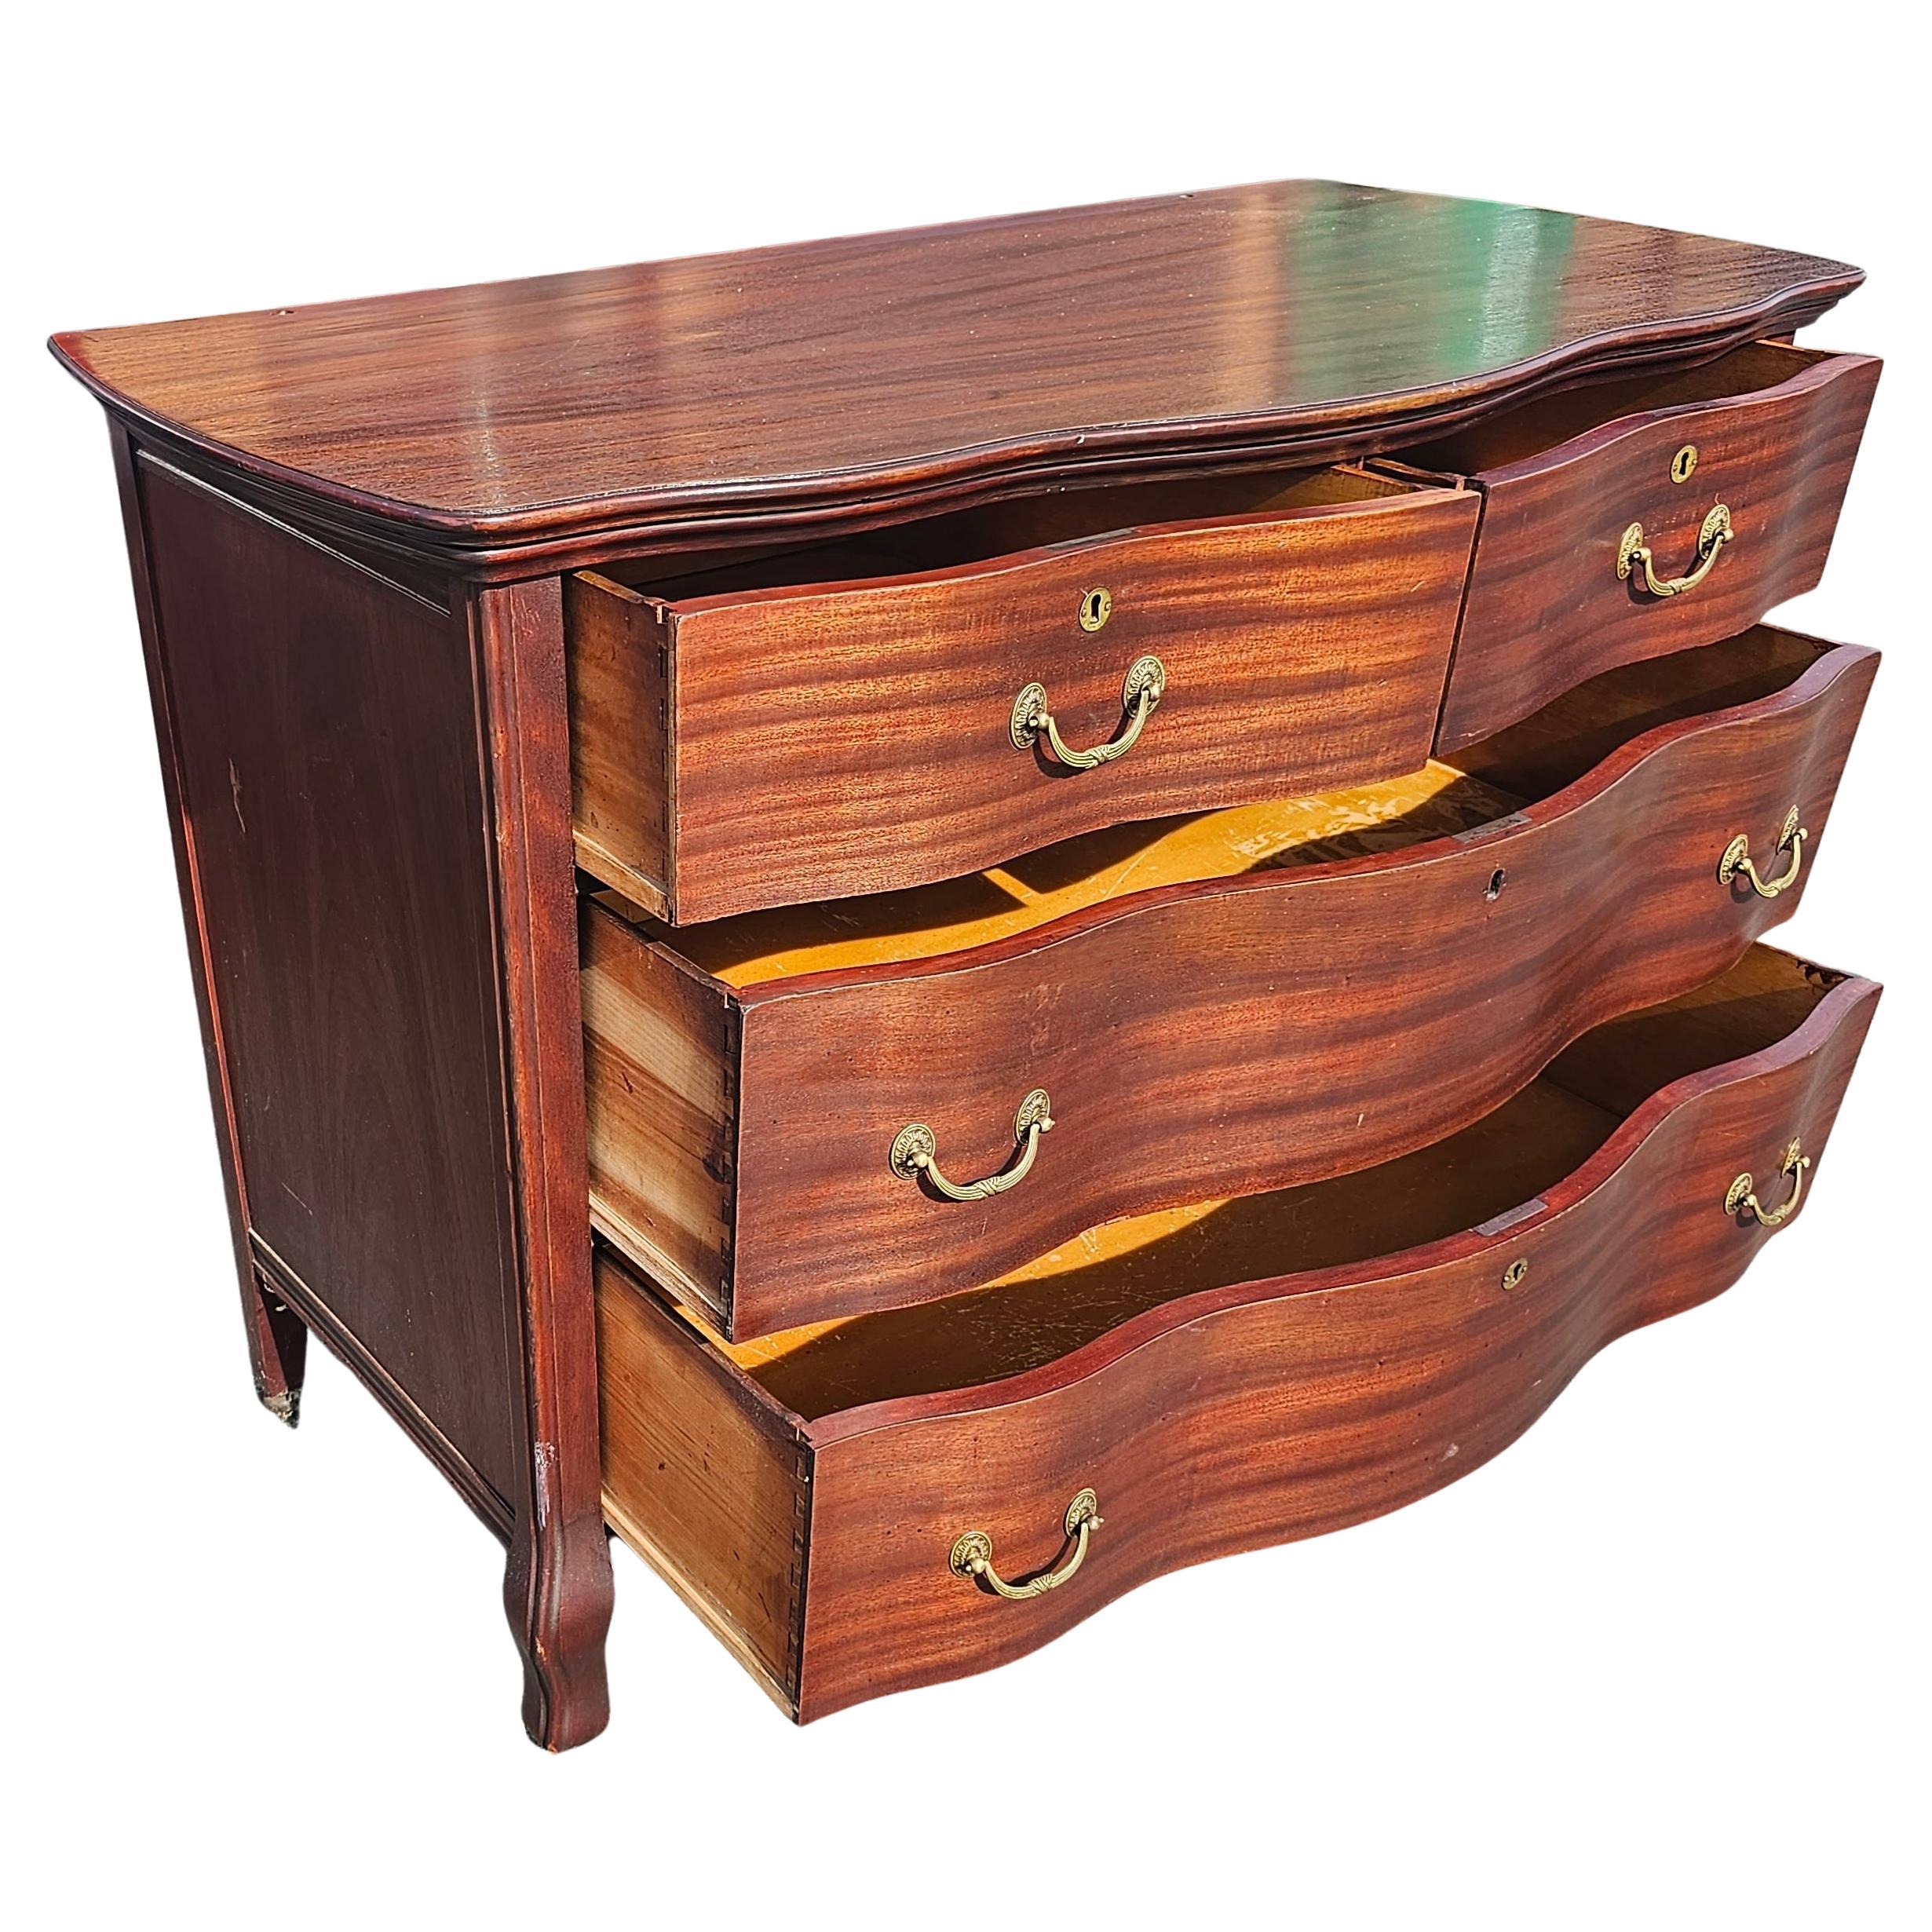 Other Early 20th Century Widdicomd Tiger Mahogany Serpentine Commode Chest on Wheels For Sale